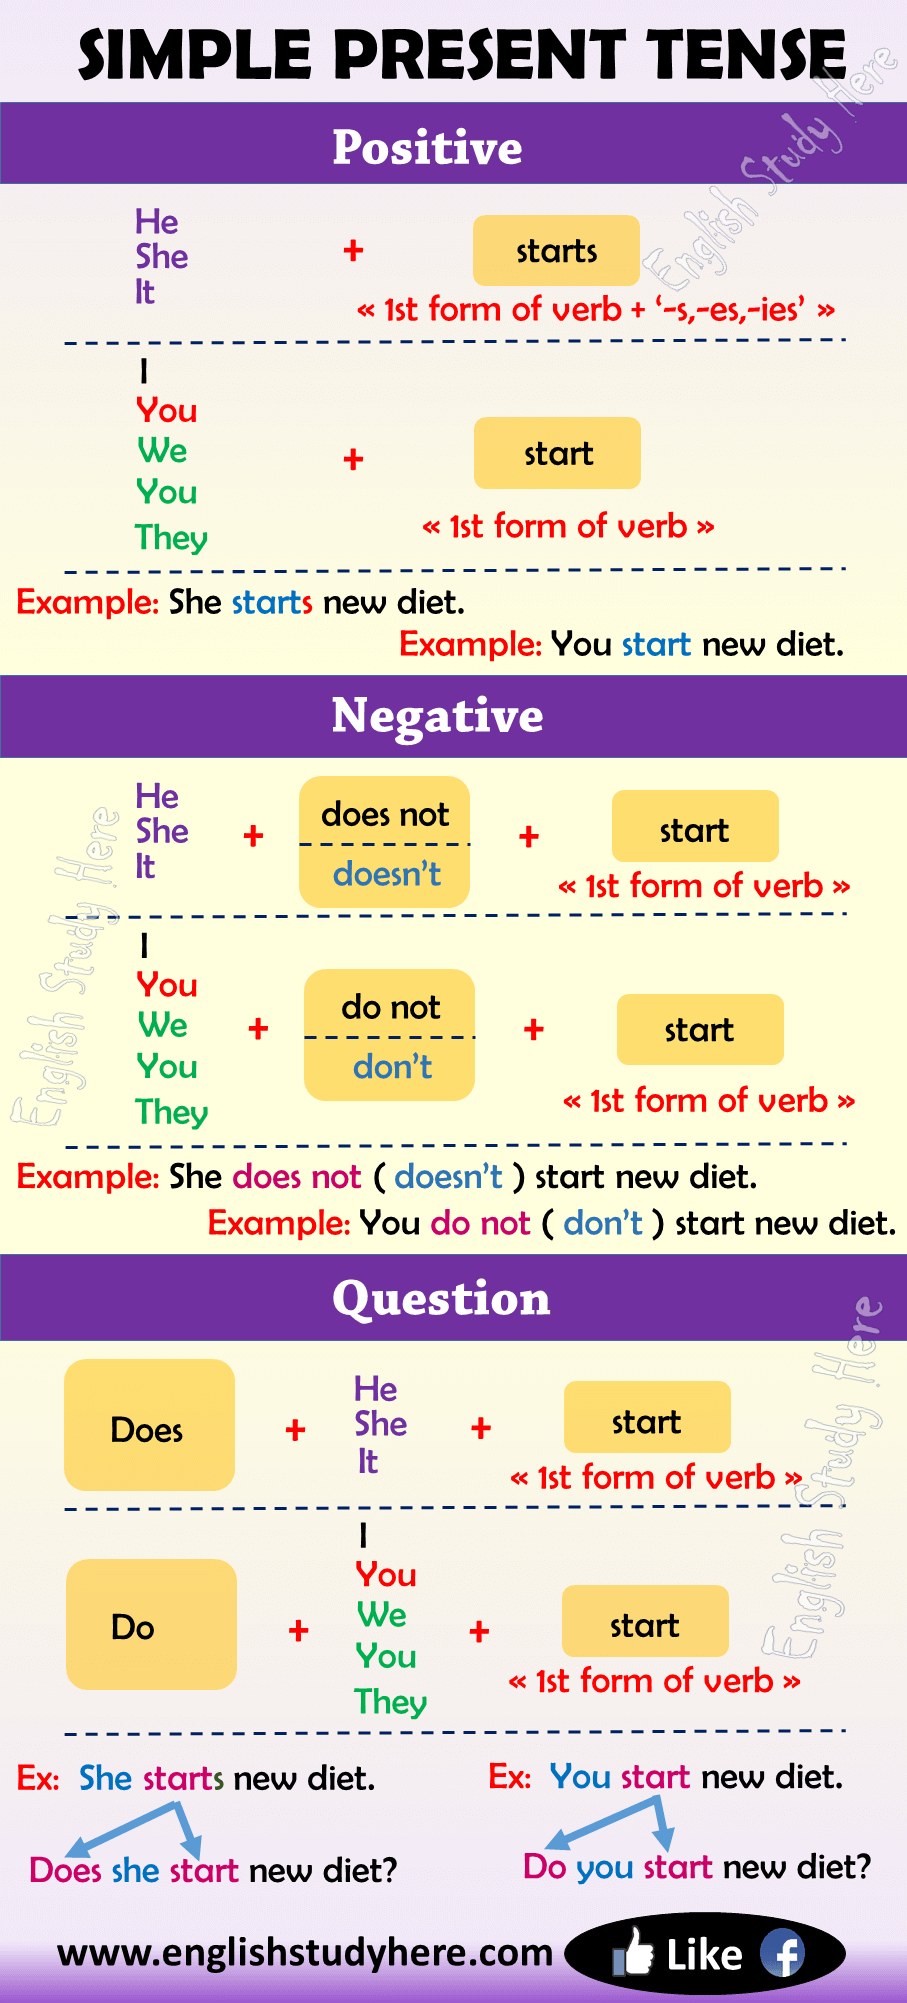 simple-present-tense-definition-and-useful-examples-esl-grammar